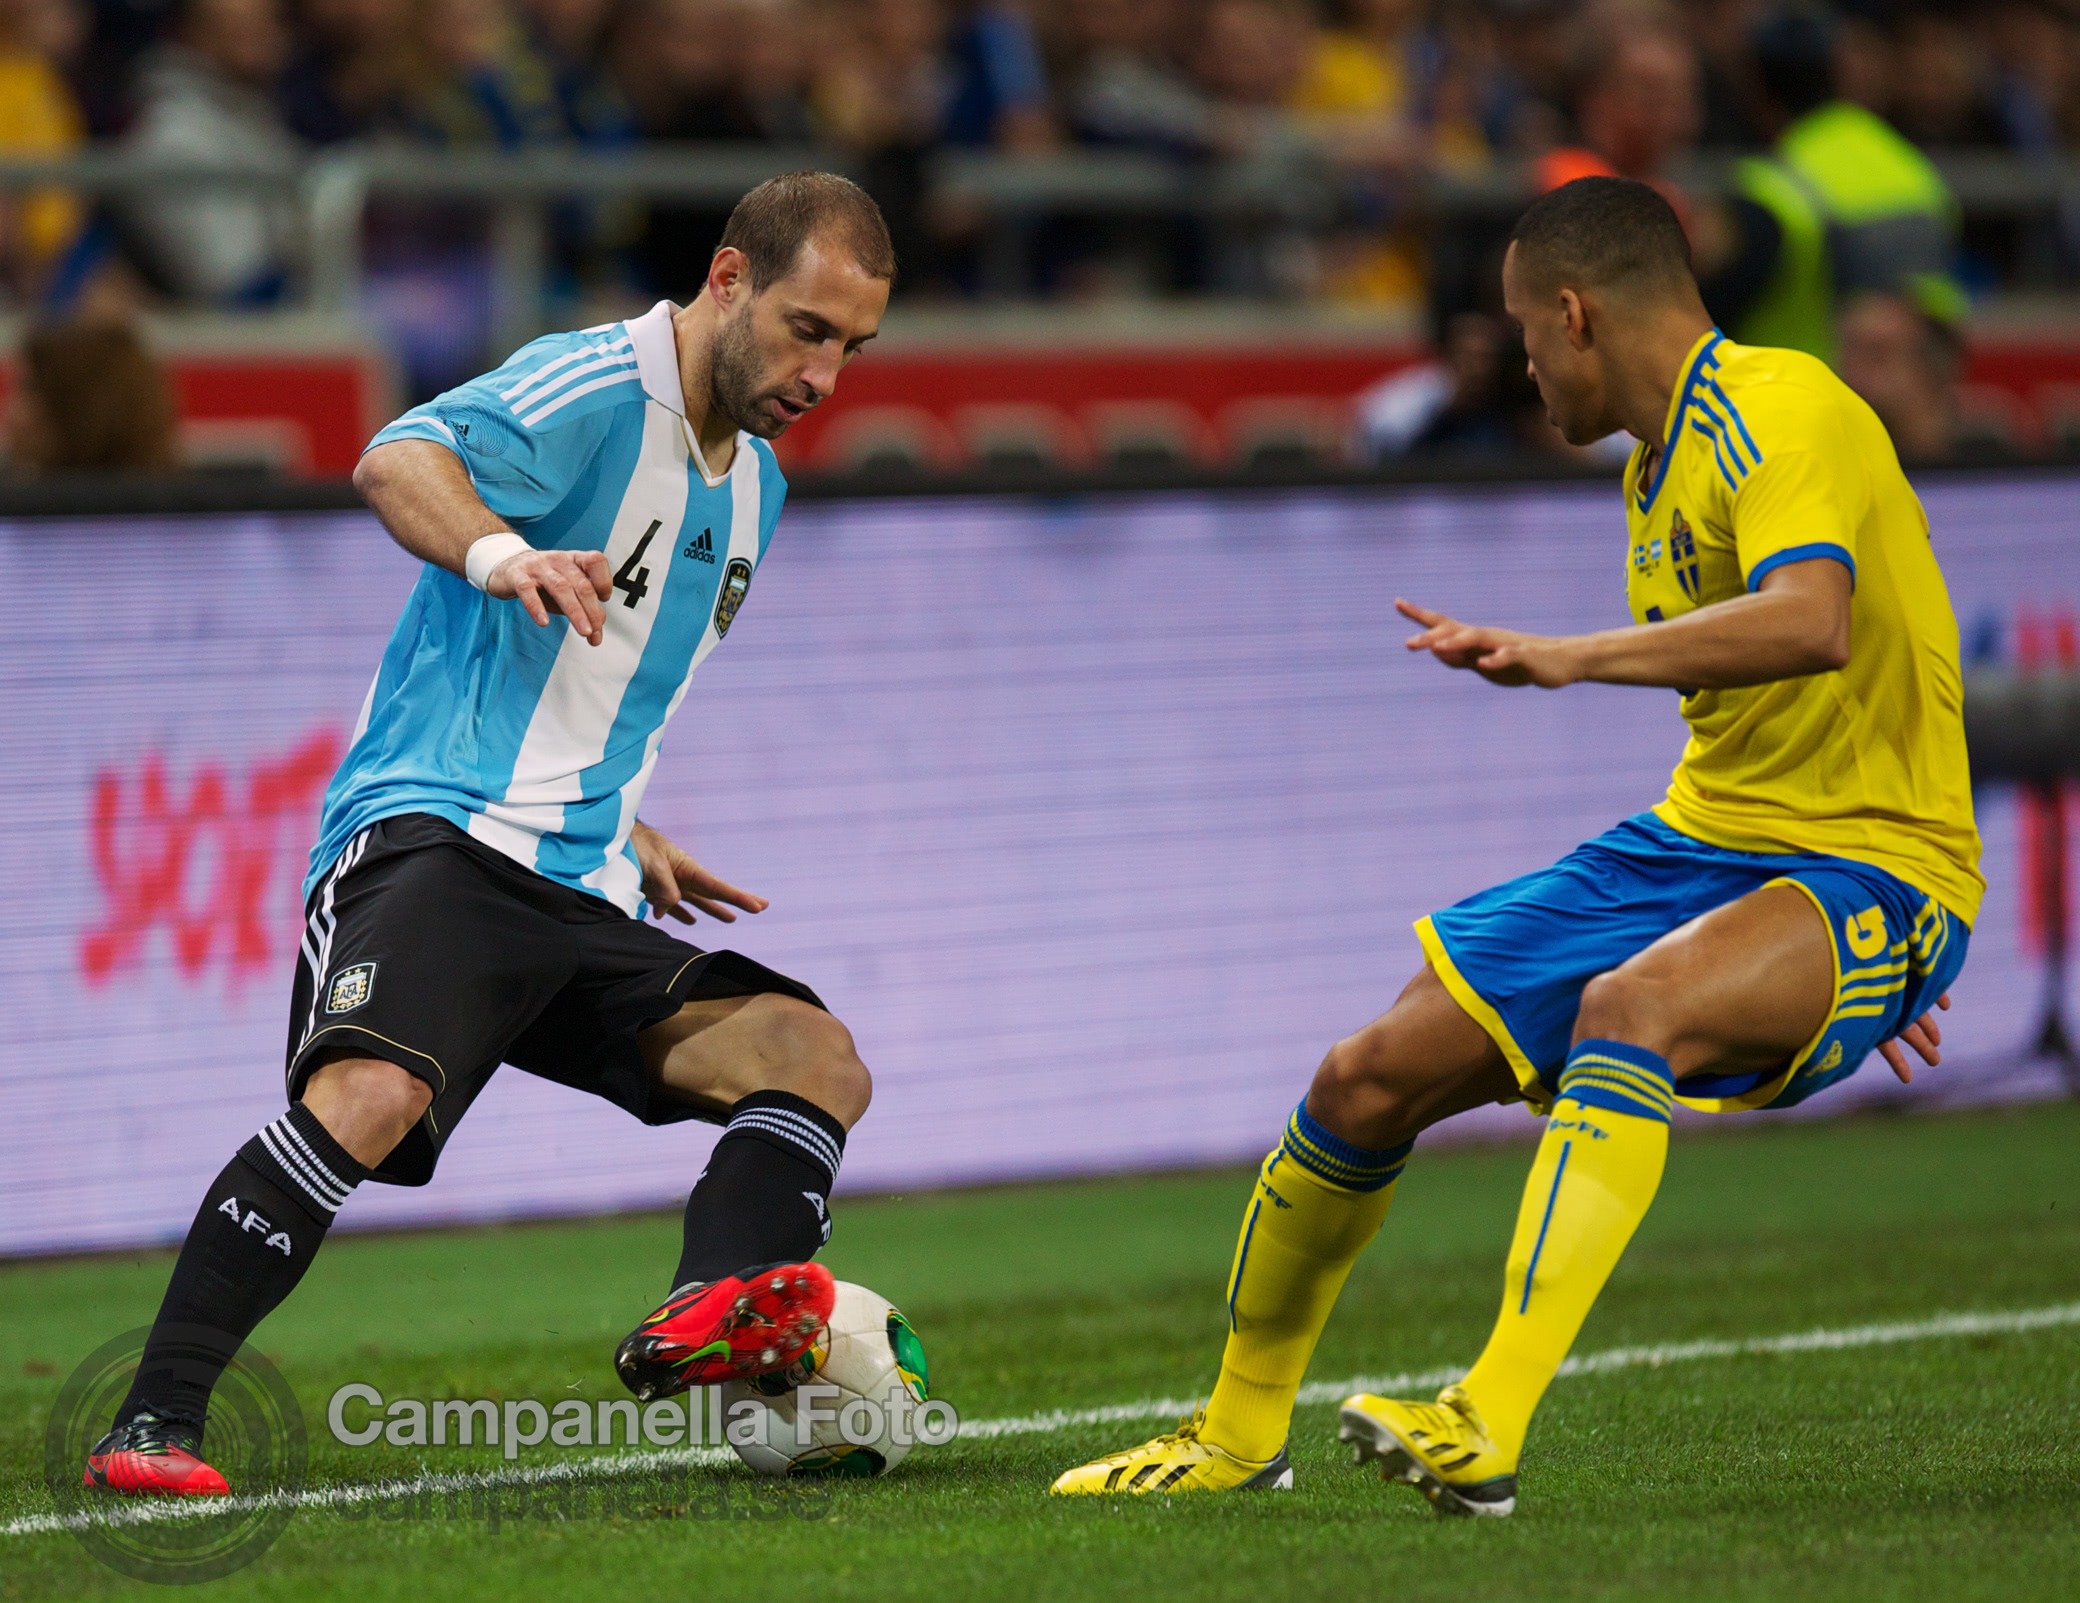 Sweden takes on Argentina - 6 of 35